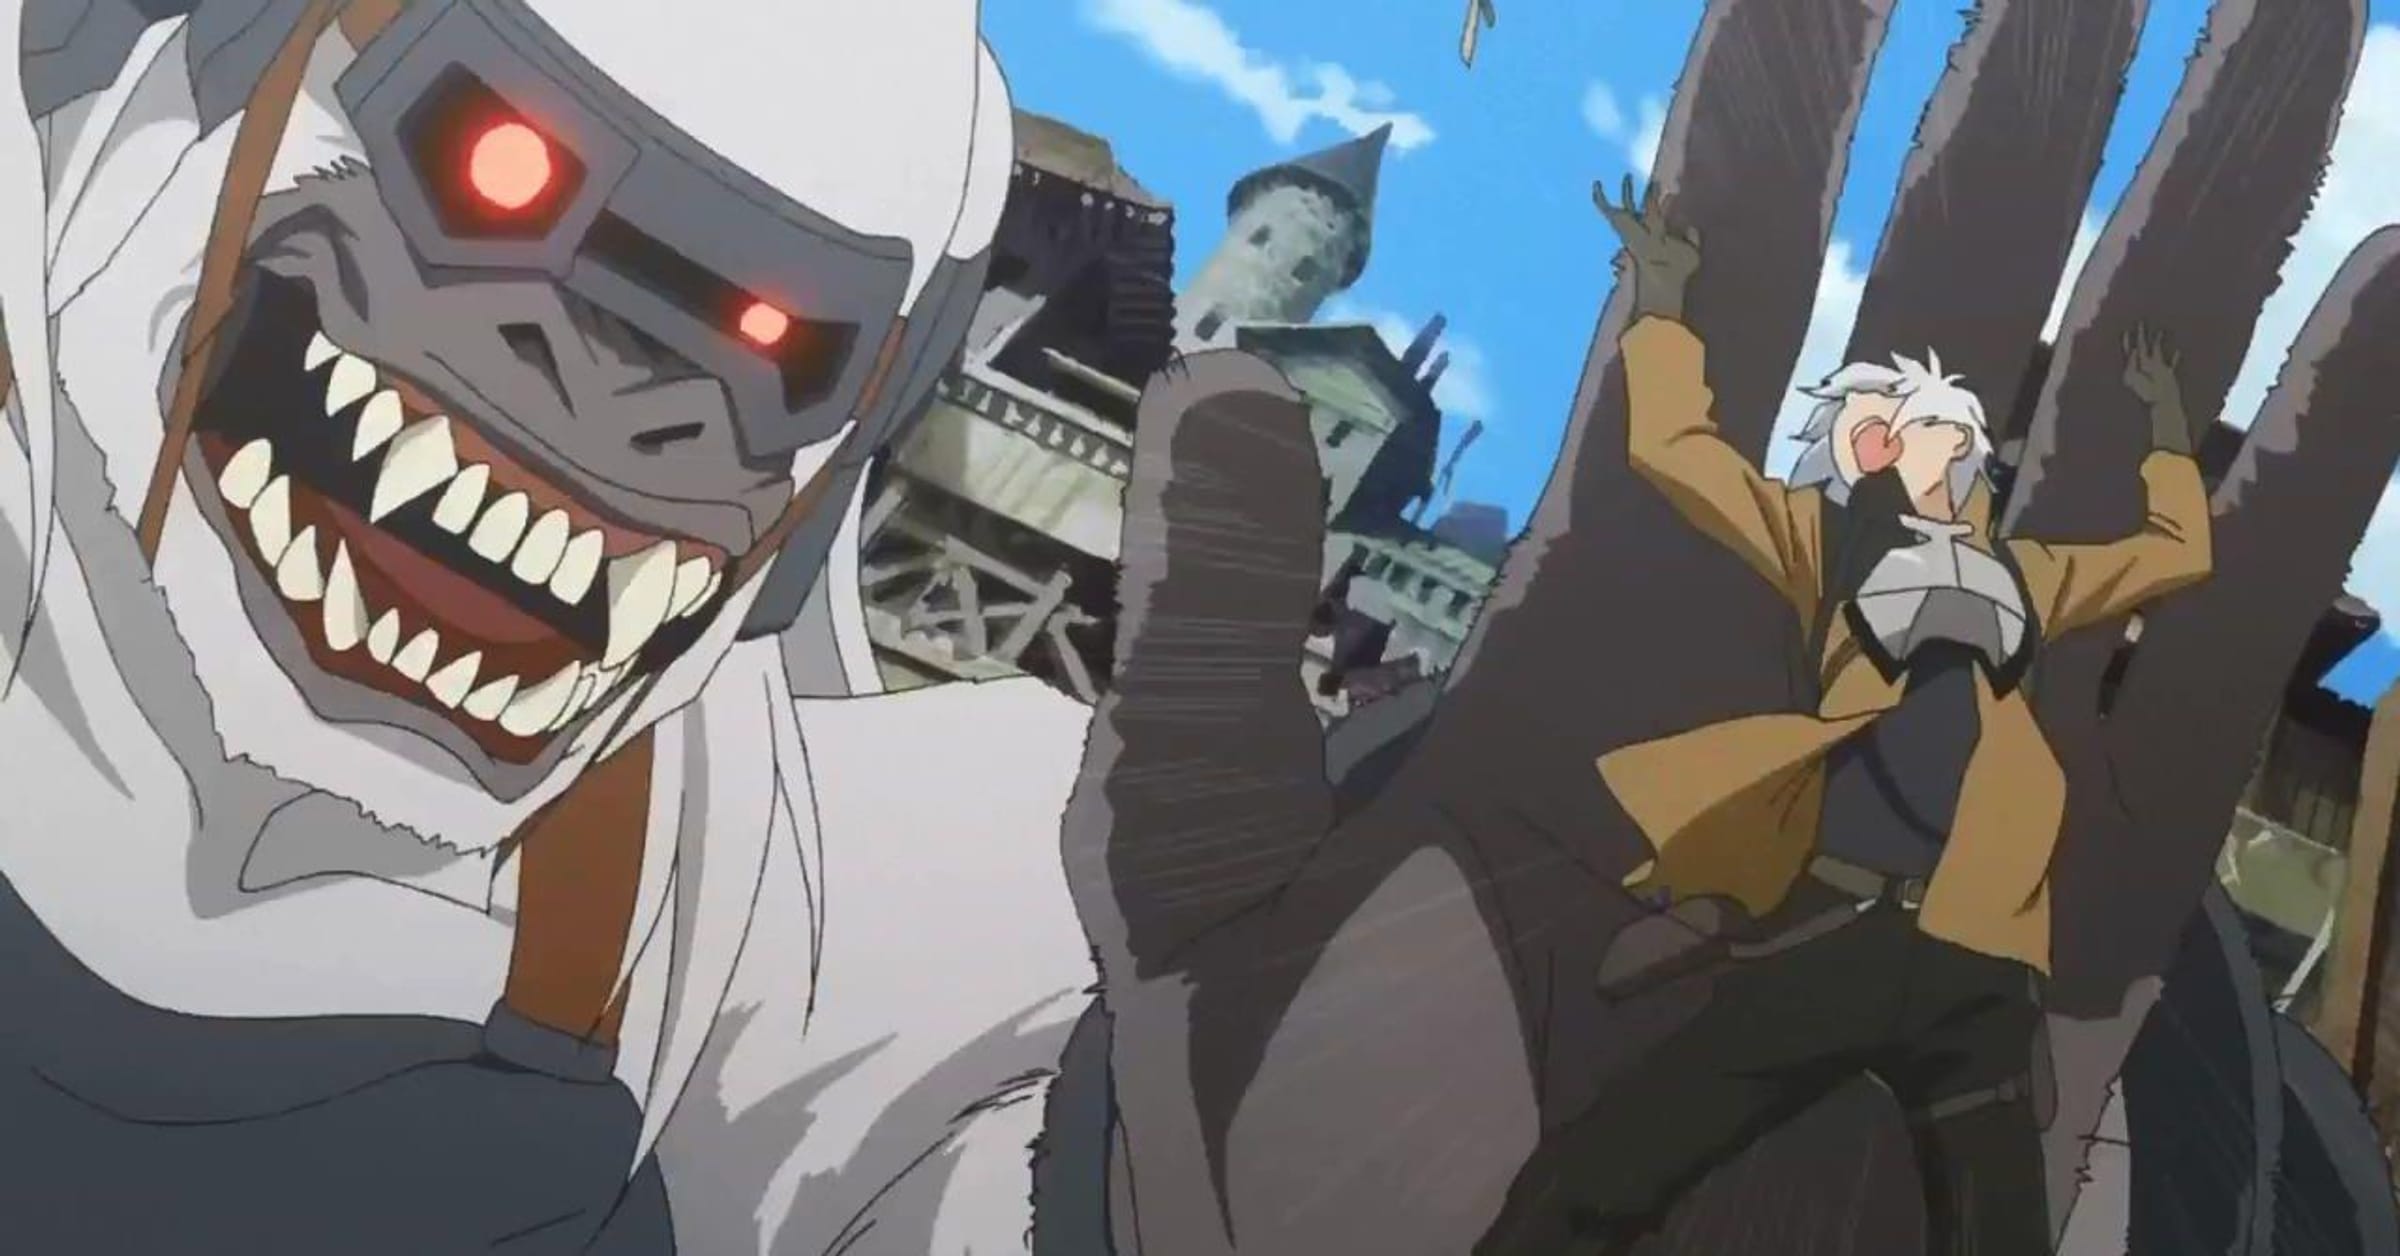 Anime Monsters: 15 Of The Most Terrifying Creatures and Demons 